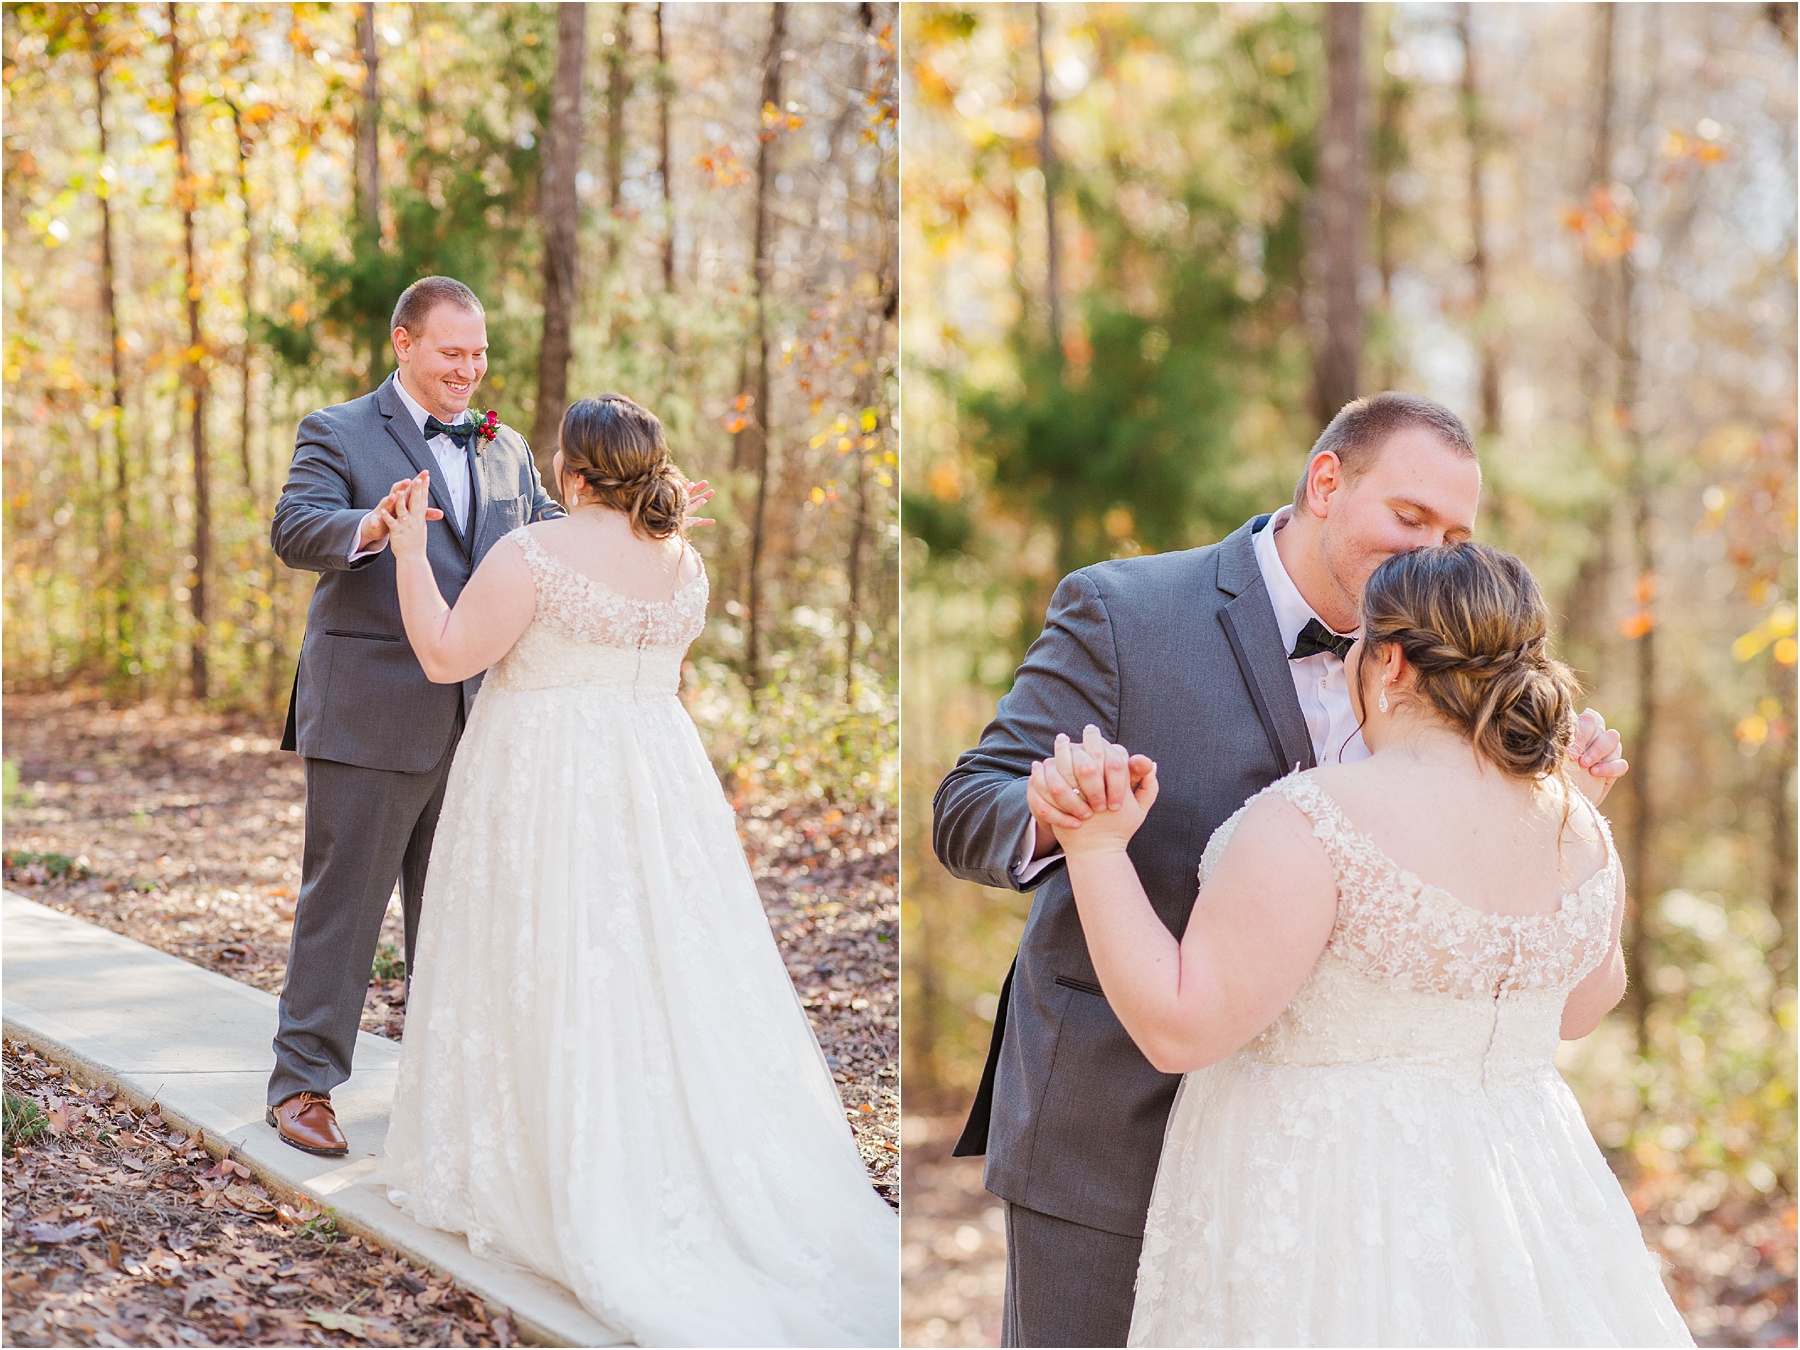 groom and bride share a first look on a pathway in the woods